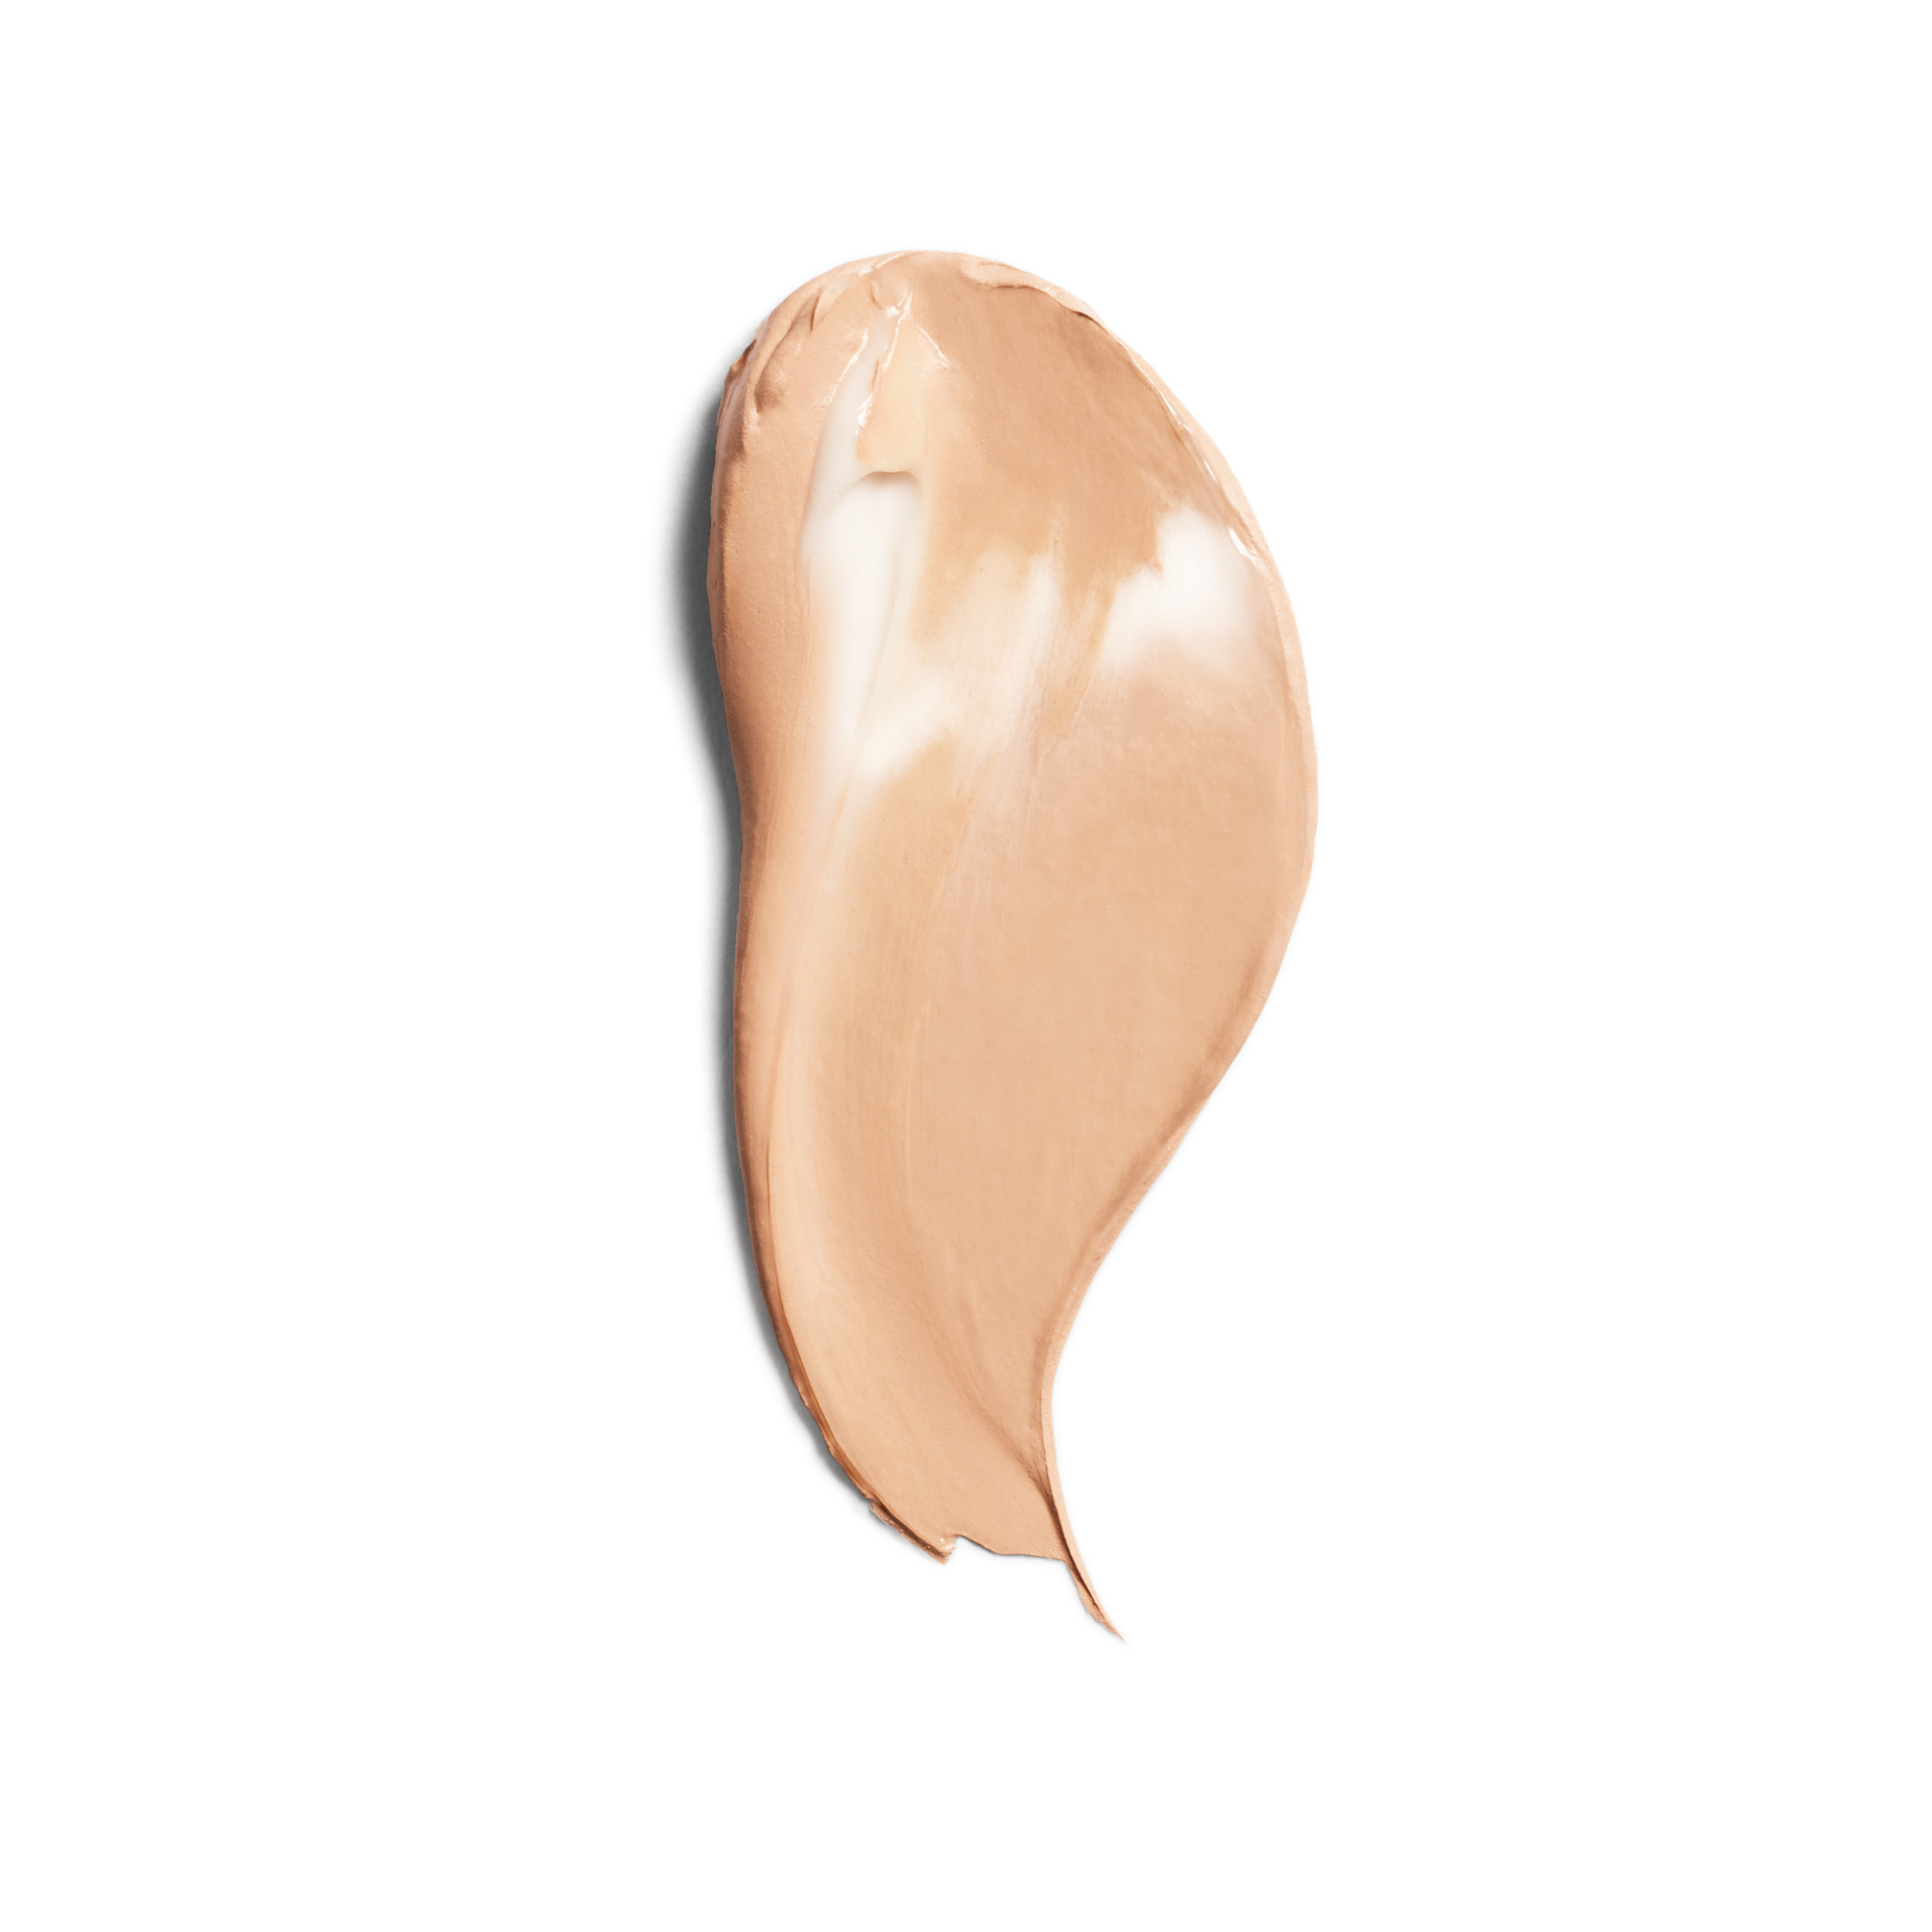 COVERGIRL + OLAY Simply Ageless Instant Wrinkle-Defying Foundation with SPF 28, Buff Beige, 0.44 oz - image 3 of 9